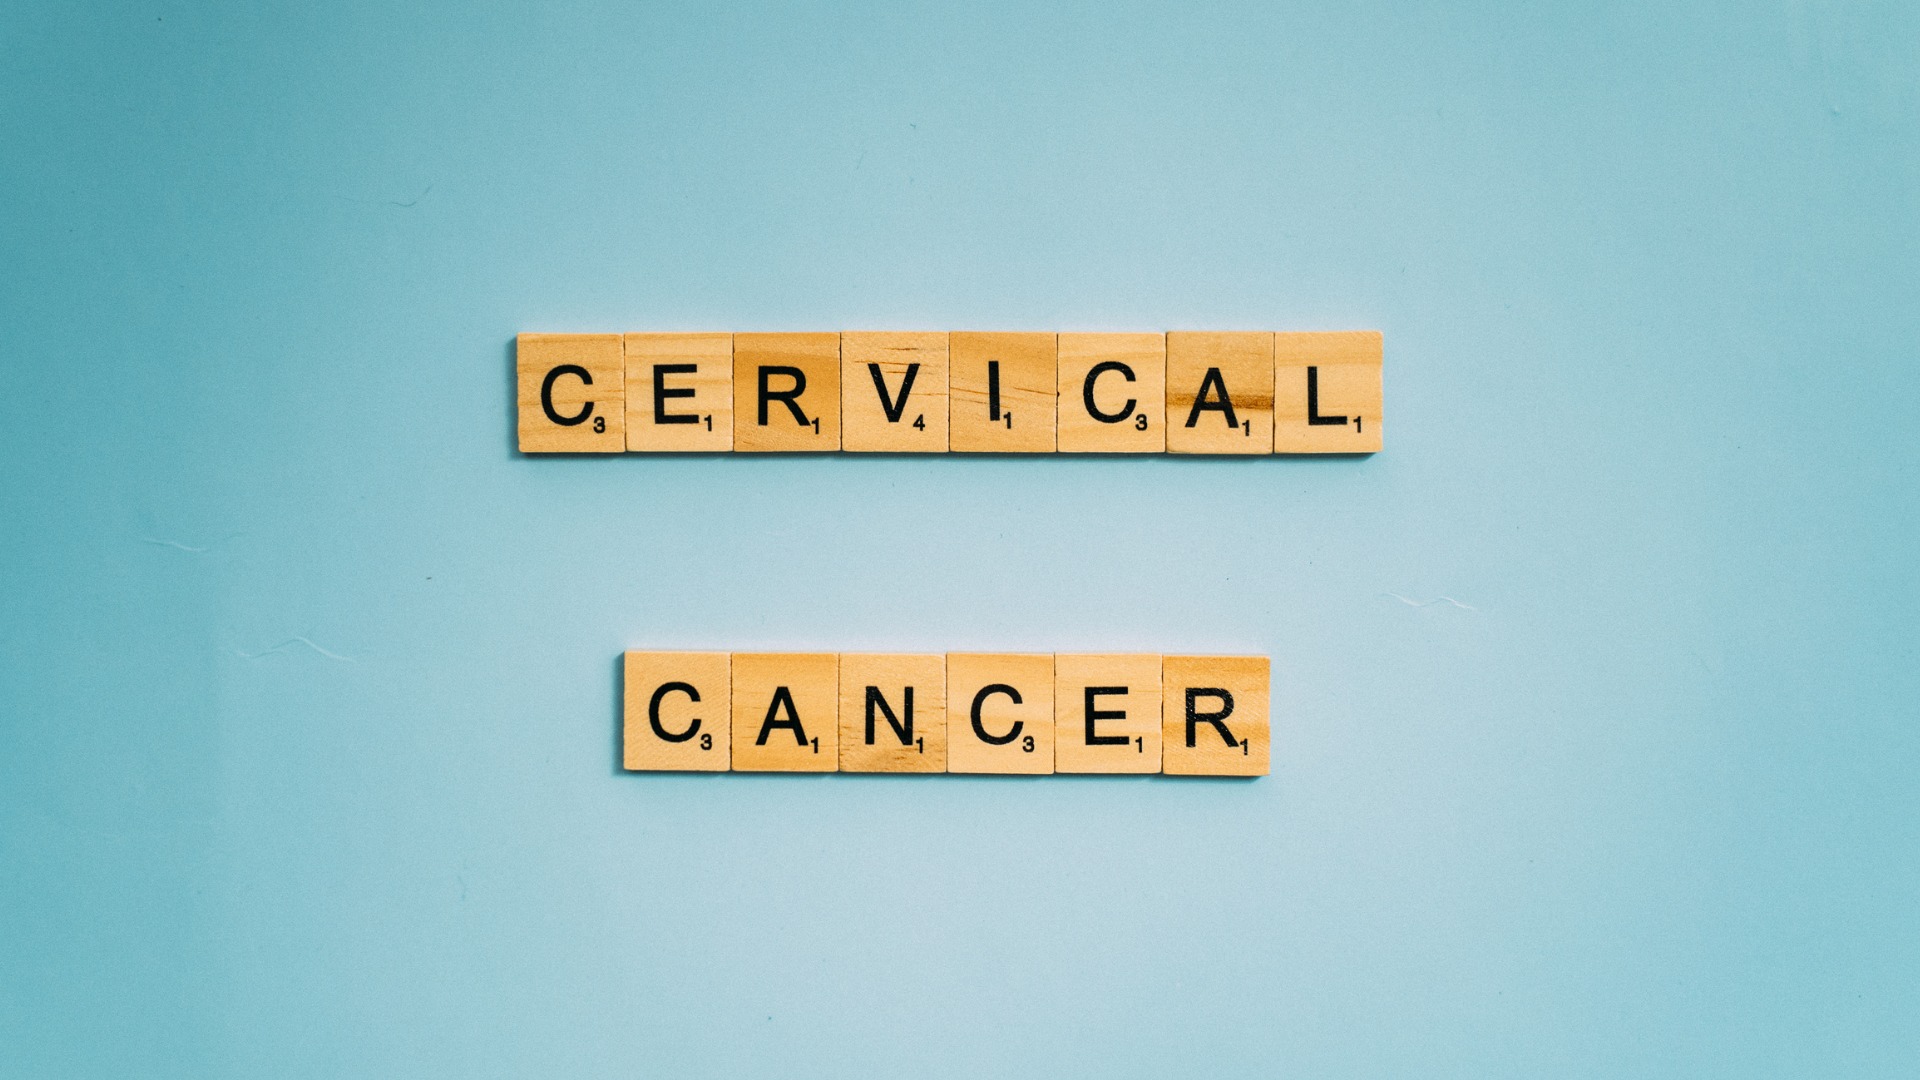 Cervical cancer spelled out with scrabble letters